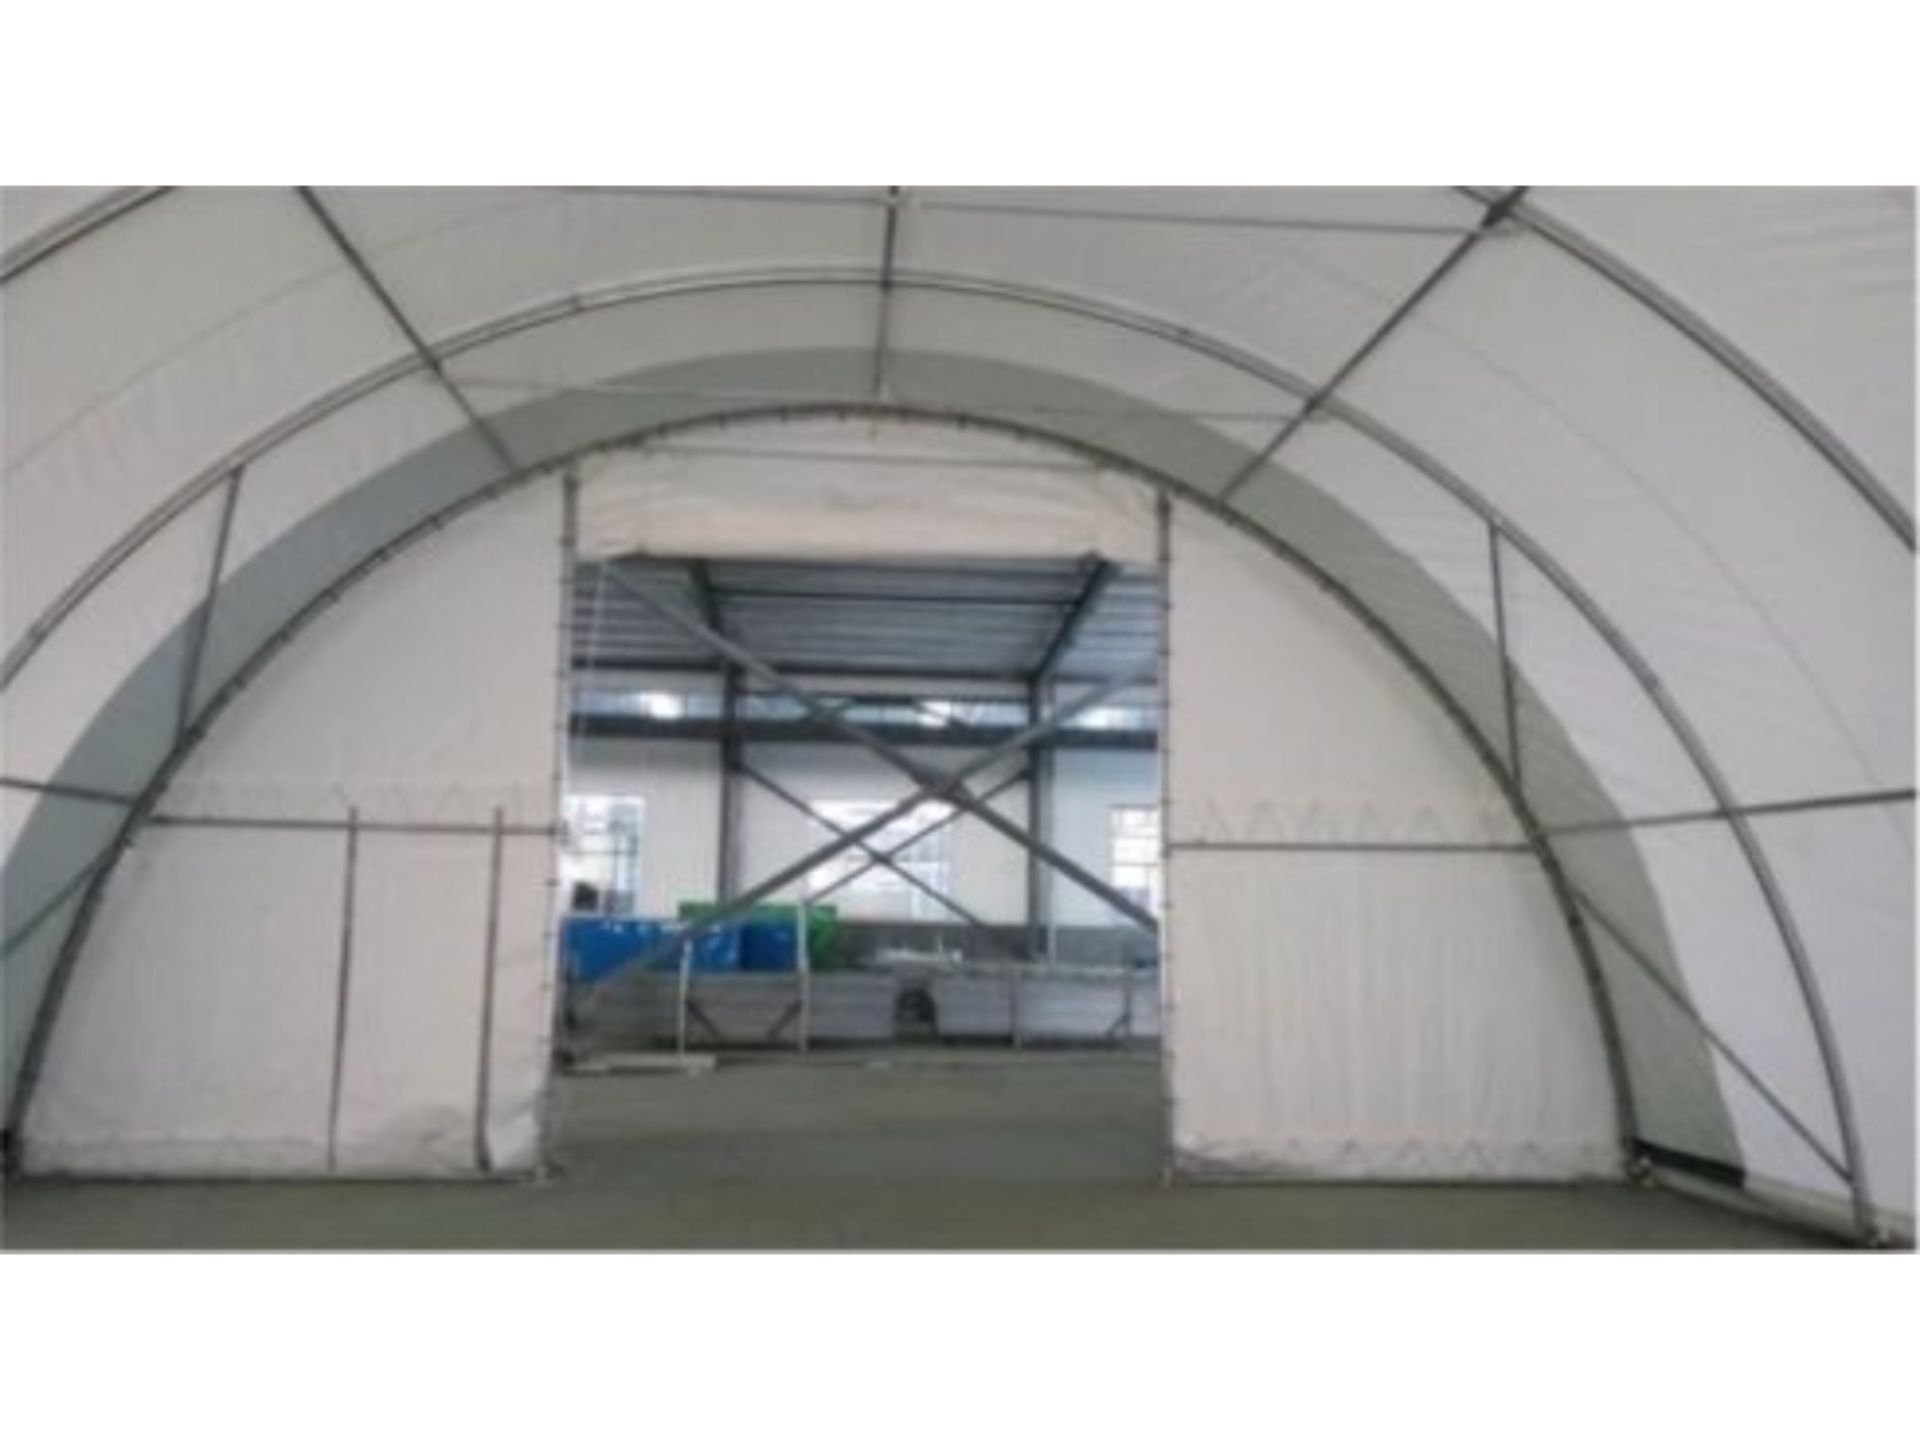 30' x 40' x 15 Dome Shelter - Image 8 of 8